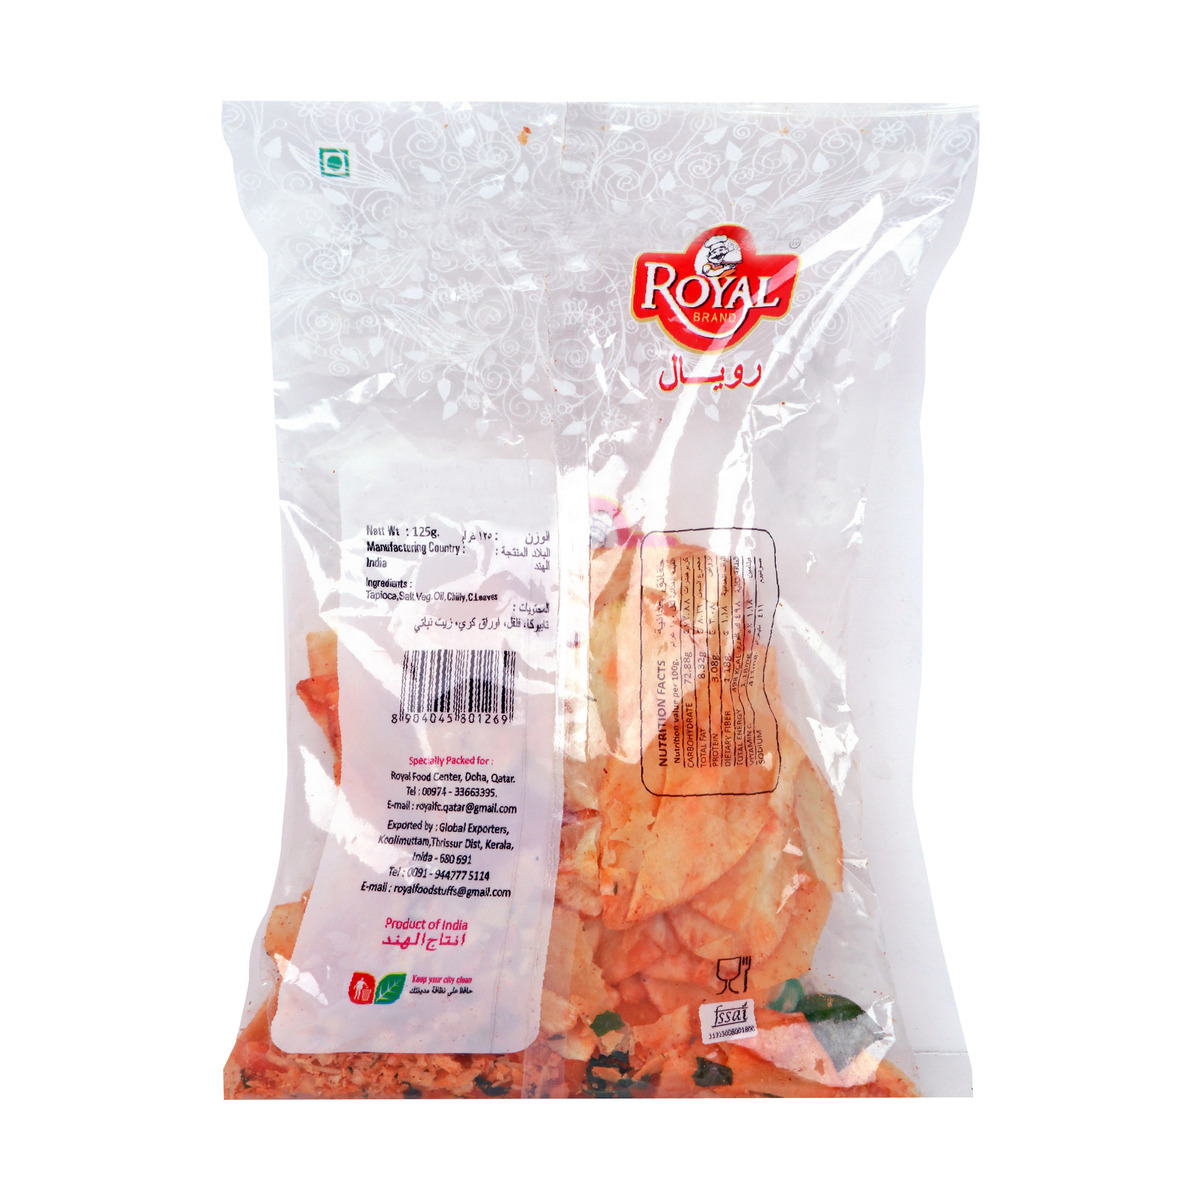 Royal Tapioca Chips (Chilly) 125g